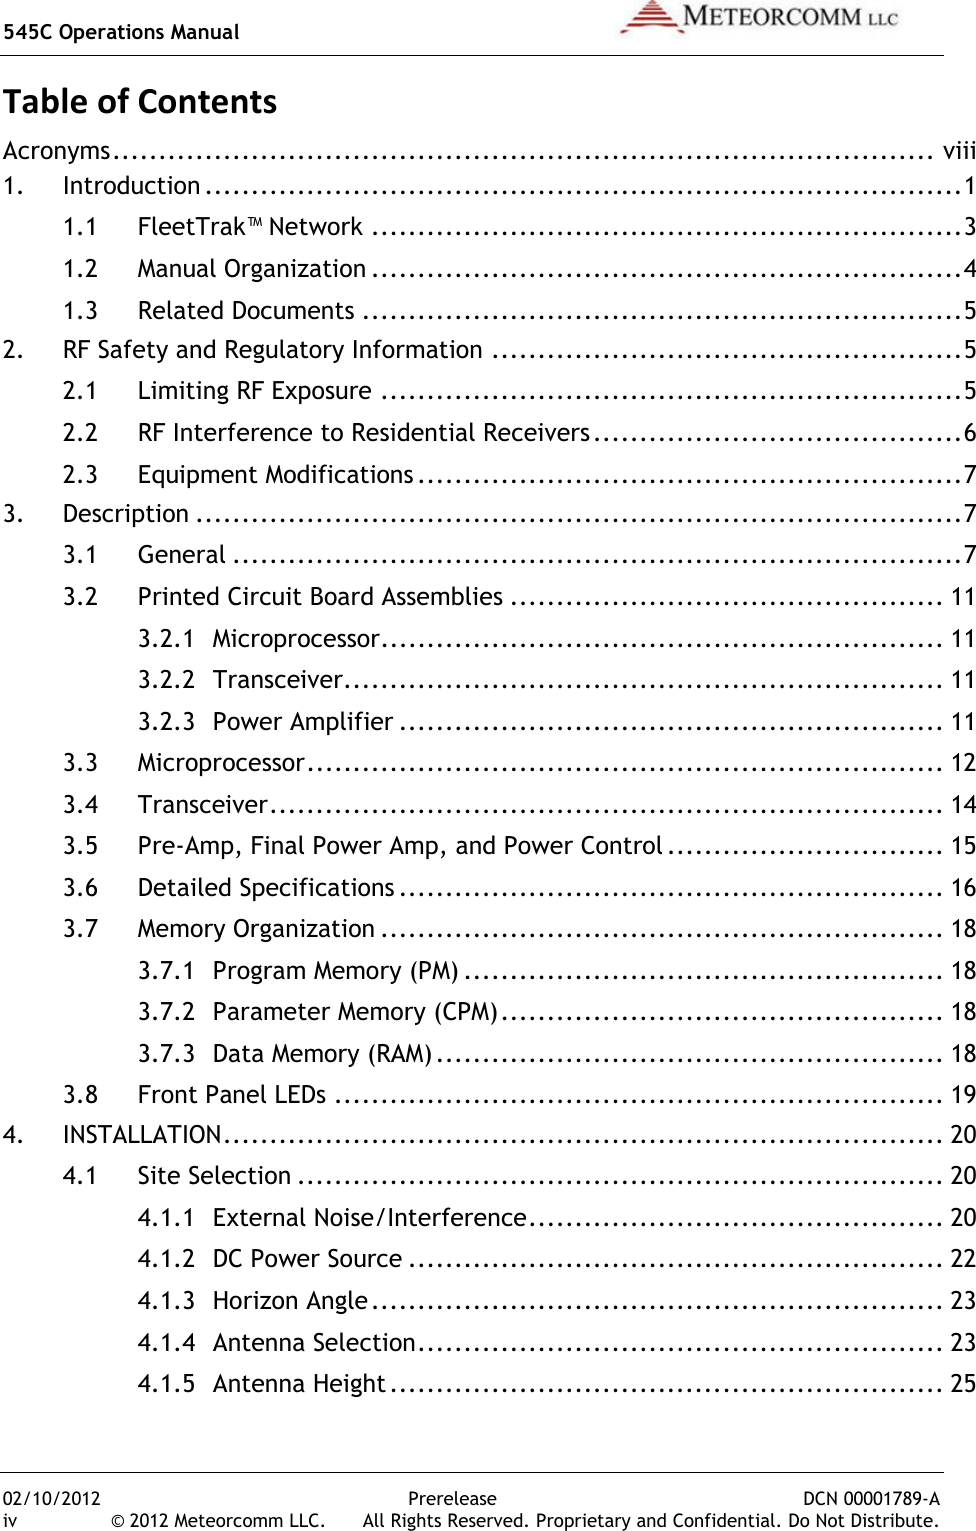 545C Operations Manual   02/10/2012  Prerelease  DCN 00001789-A iv  © 2012 Meteorcomm LLC.   All Rights Reserved. Proprietary and Confidential. Do Not Distribute. Table of Contents Acronyms ......................................................................................... viii 1. Introduction .................................................................................. 1 1.1 FleetTrak™ Network ................................................................ 3 1.2 Manual Organization ................................................................ 4 1.3 Related Documents ................................................................. 5 2. RF Safety and Regulatory Information ................................................... 5 2.1 Limiting RF Exposure ............................................................... 5 2.2 RF Interference to Residential Receivers ........................................ 6 2.3 Equipment Modifications ........................................................... 7 3. Description ................................................................................... 7 3.1 General ............................................................................... 7 3.2 Printed Circuit Board Assemblies ............................................... 11 3.2.1 Microprocessor ............................................................. 11 3.2.2 Transceiver ................................................................. 11 3.2.3 Power Amplifier ........................................................... 11 3.3 Microprocessor ..................................................................... 12 3.4 Transceiver ......................................................................... 14 3.5 Pre-Amp, Final Power Amp, and Power Control .............................. 15 3.6 Detailed Specifications ........................................................... 16 3.7 Memory Organization ............................................................. 18 3.7.1 Program Memory (PM) .................................................... 18 3.7.2 Parameter Memory (CPM) ................................................ 18 3.7.3 Data Memory (RAM) ....................................................... 18 3.8 Front Panel LEDs .................................................................. 19 4. INSTALLATION .............................................................................. 20 4.1 Site Selection ...................................................................... 20 4.1.1 External Noise/Interference ............................................. 20 4.1.2 DC Power Source .......................................................... 22 4.1.3 Horizon Angle .............................................................. 23 4.1.4 Antenna Selection ......................................................... 23 4.1.5 Antenna Height ............................................................ 25 